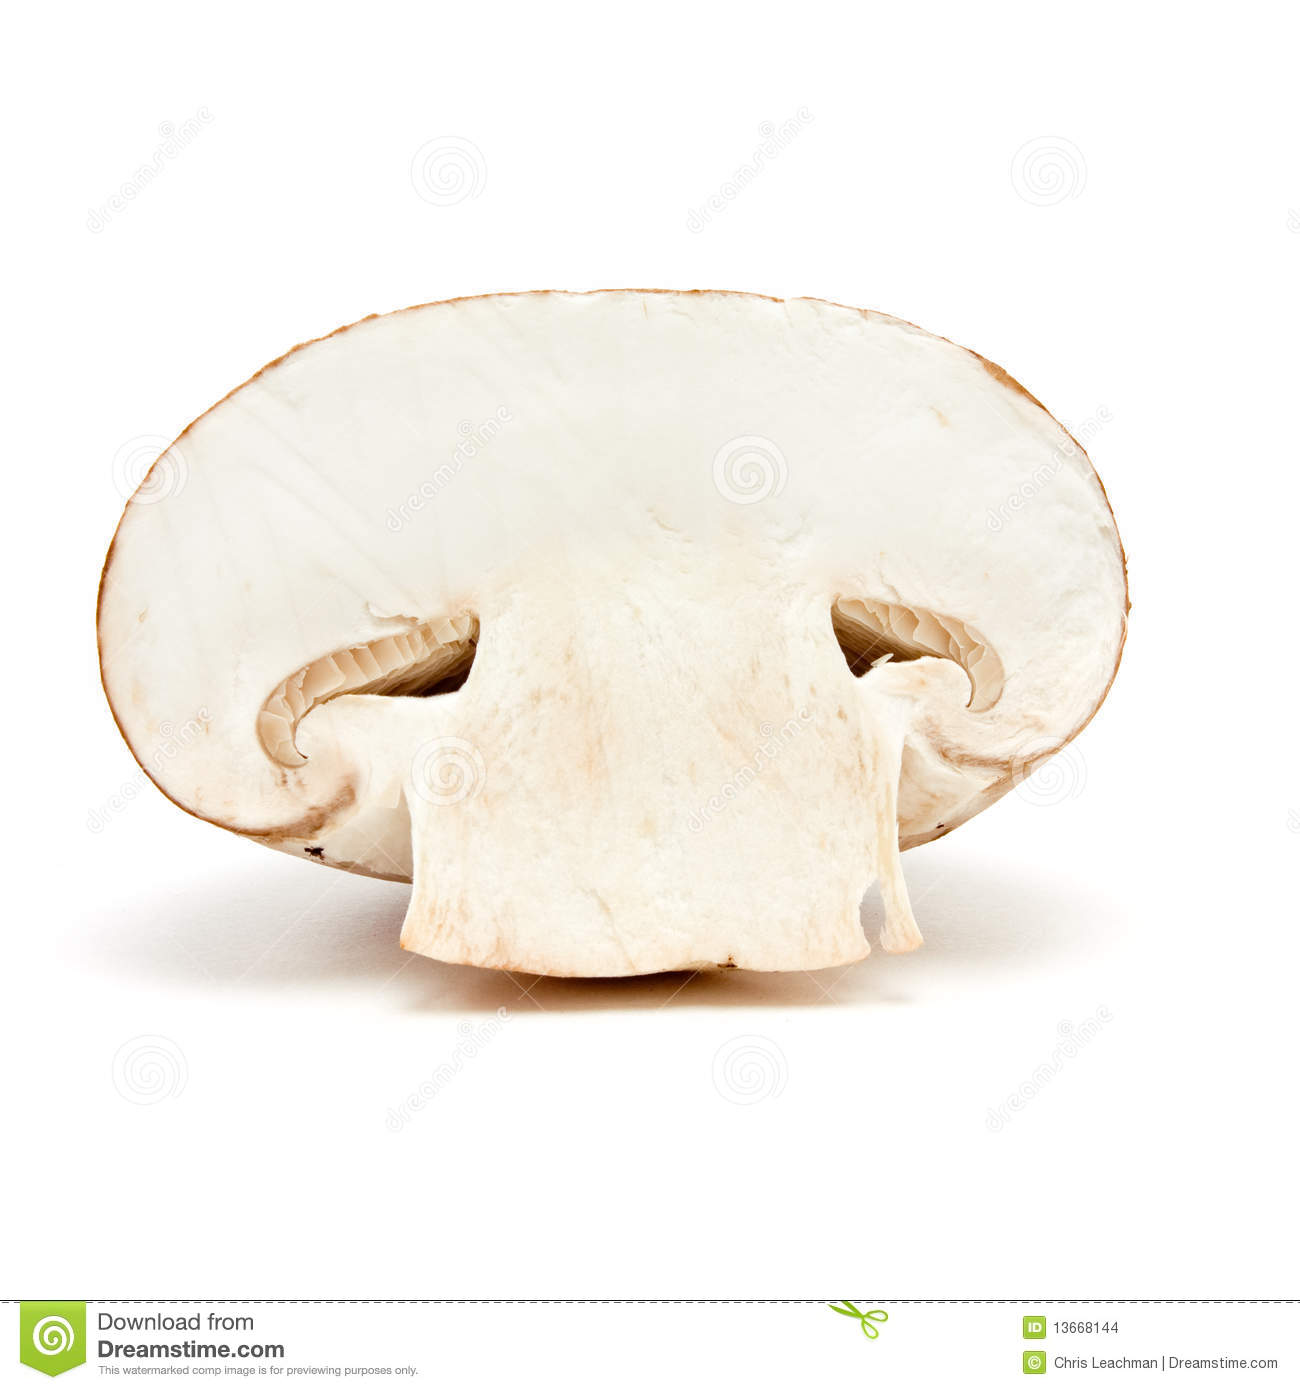 Sliced Chestnut Mushroom From Low Viewpoint Isolated Against White    